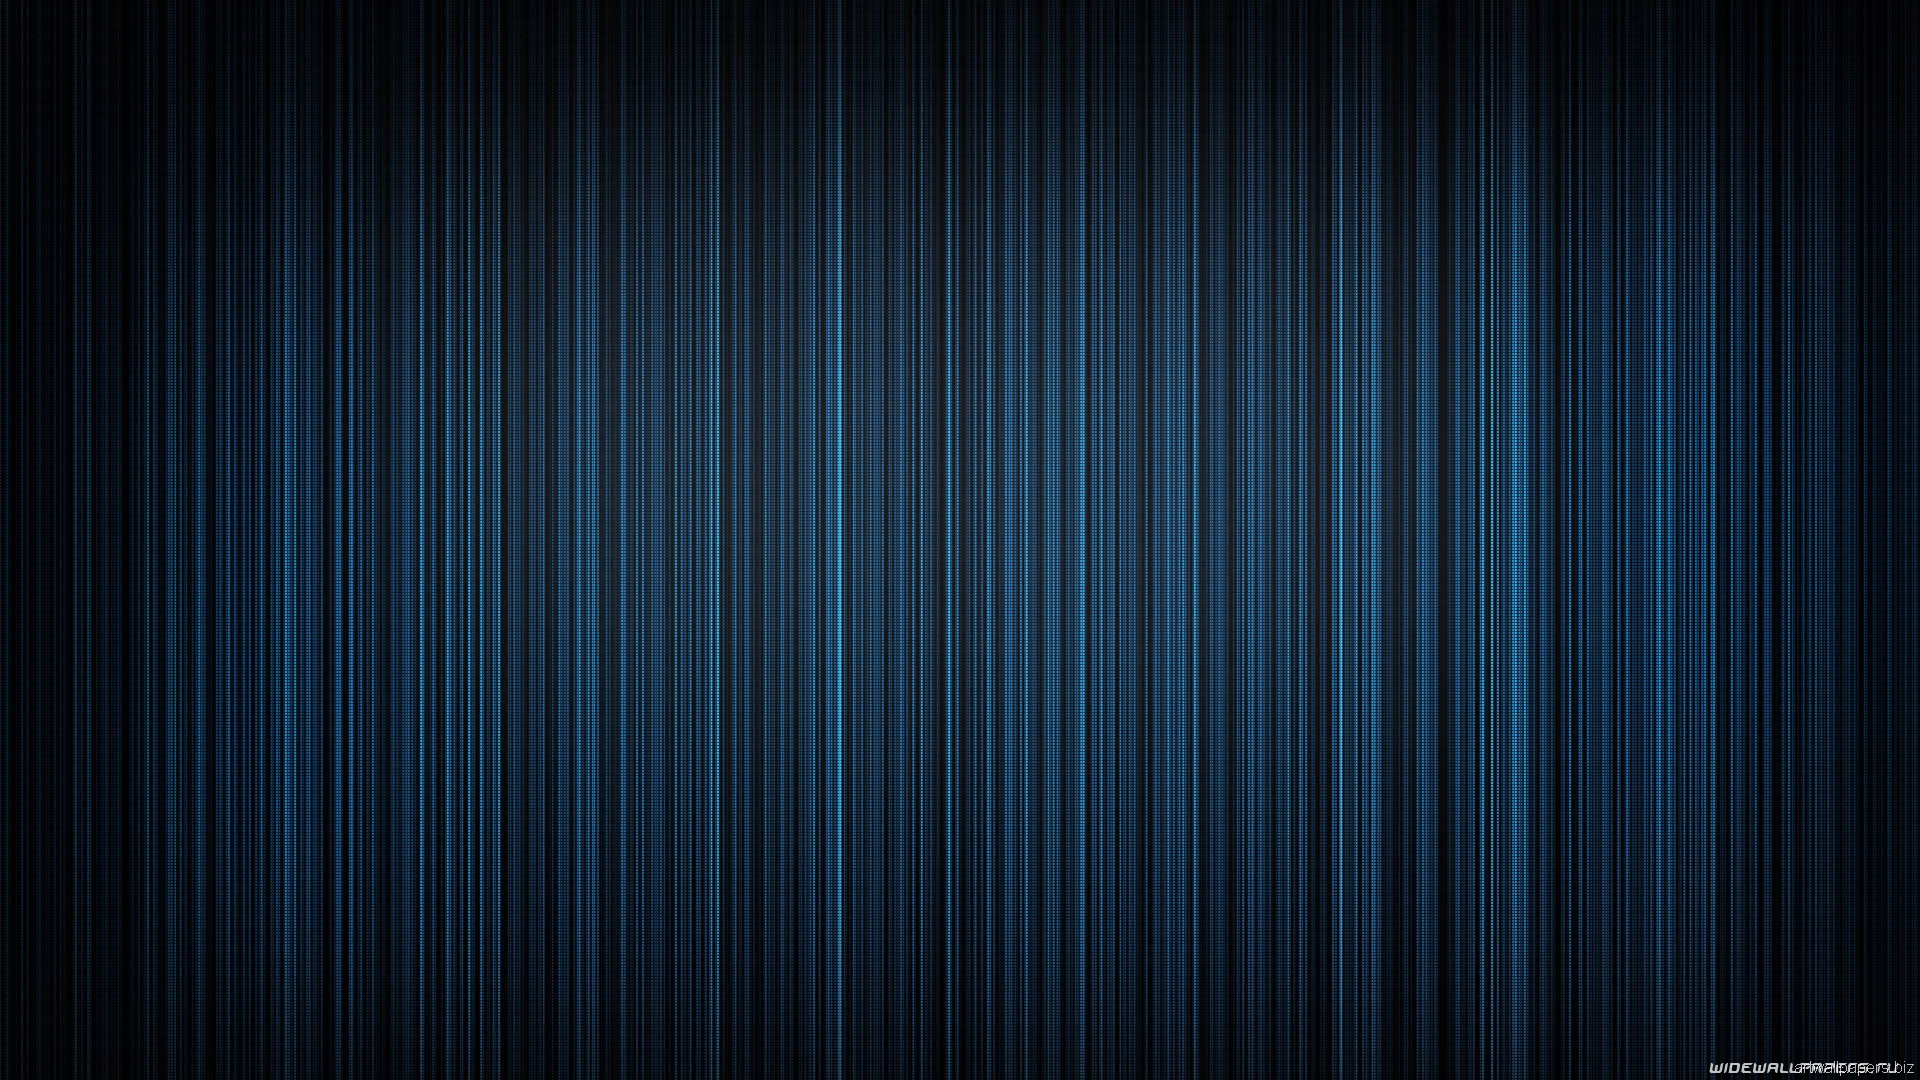 Hd abstract background